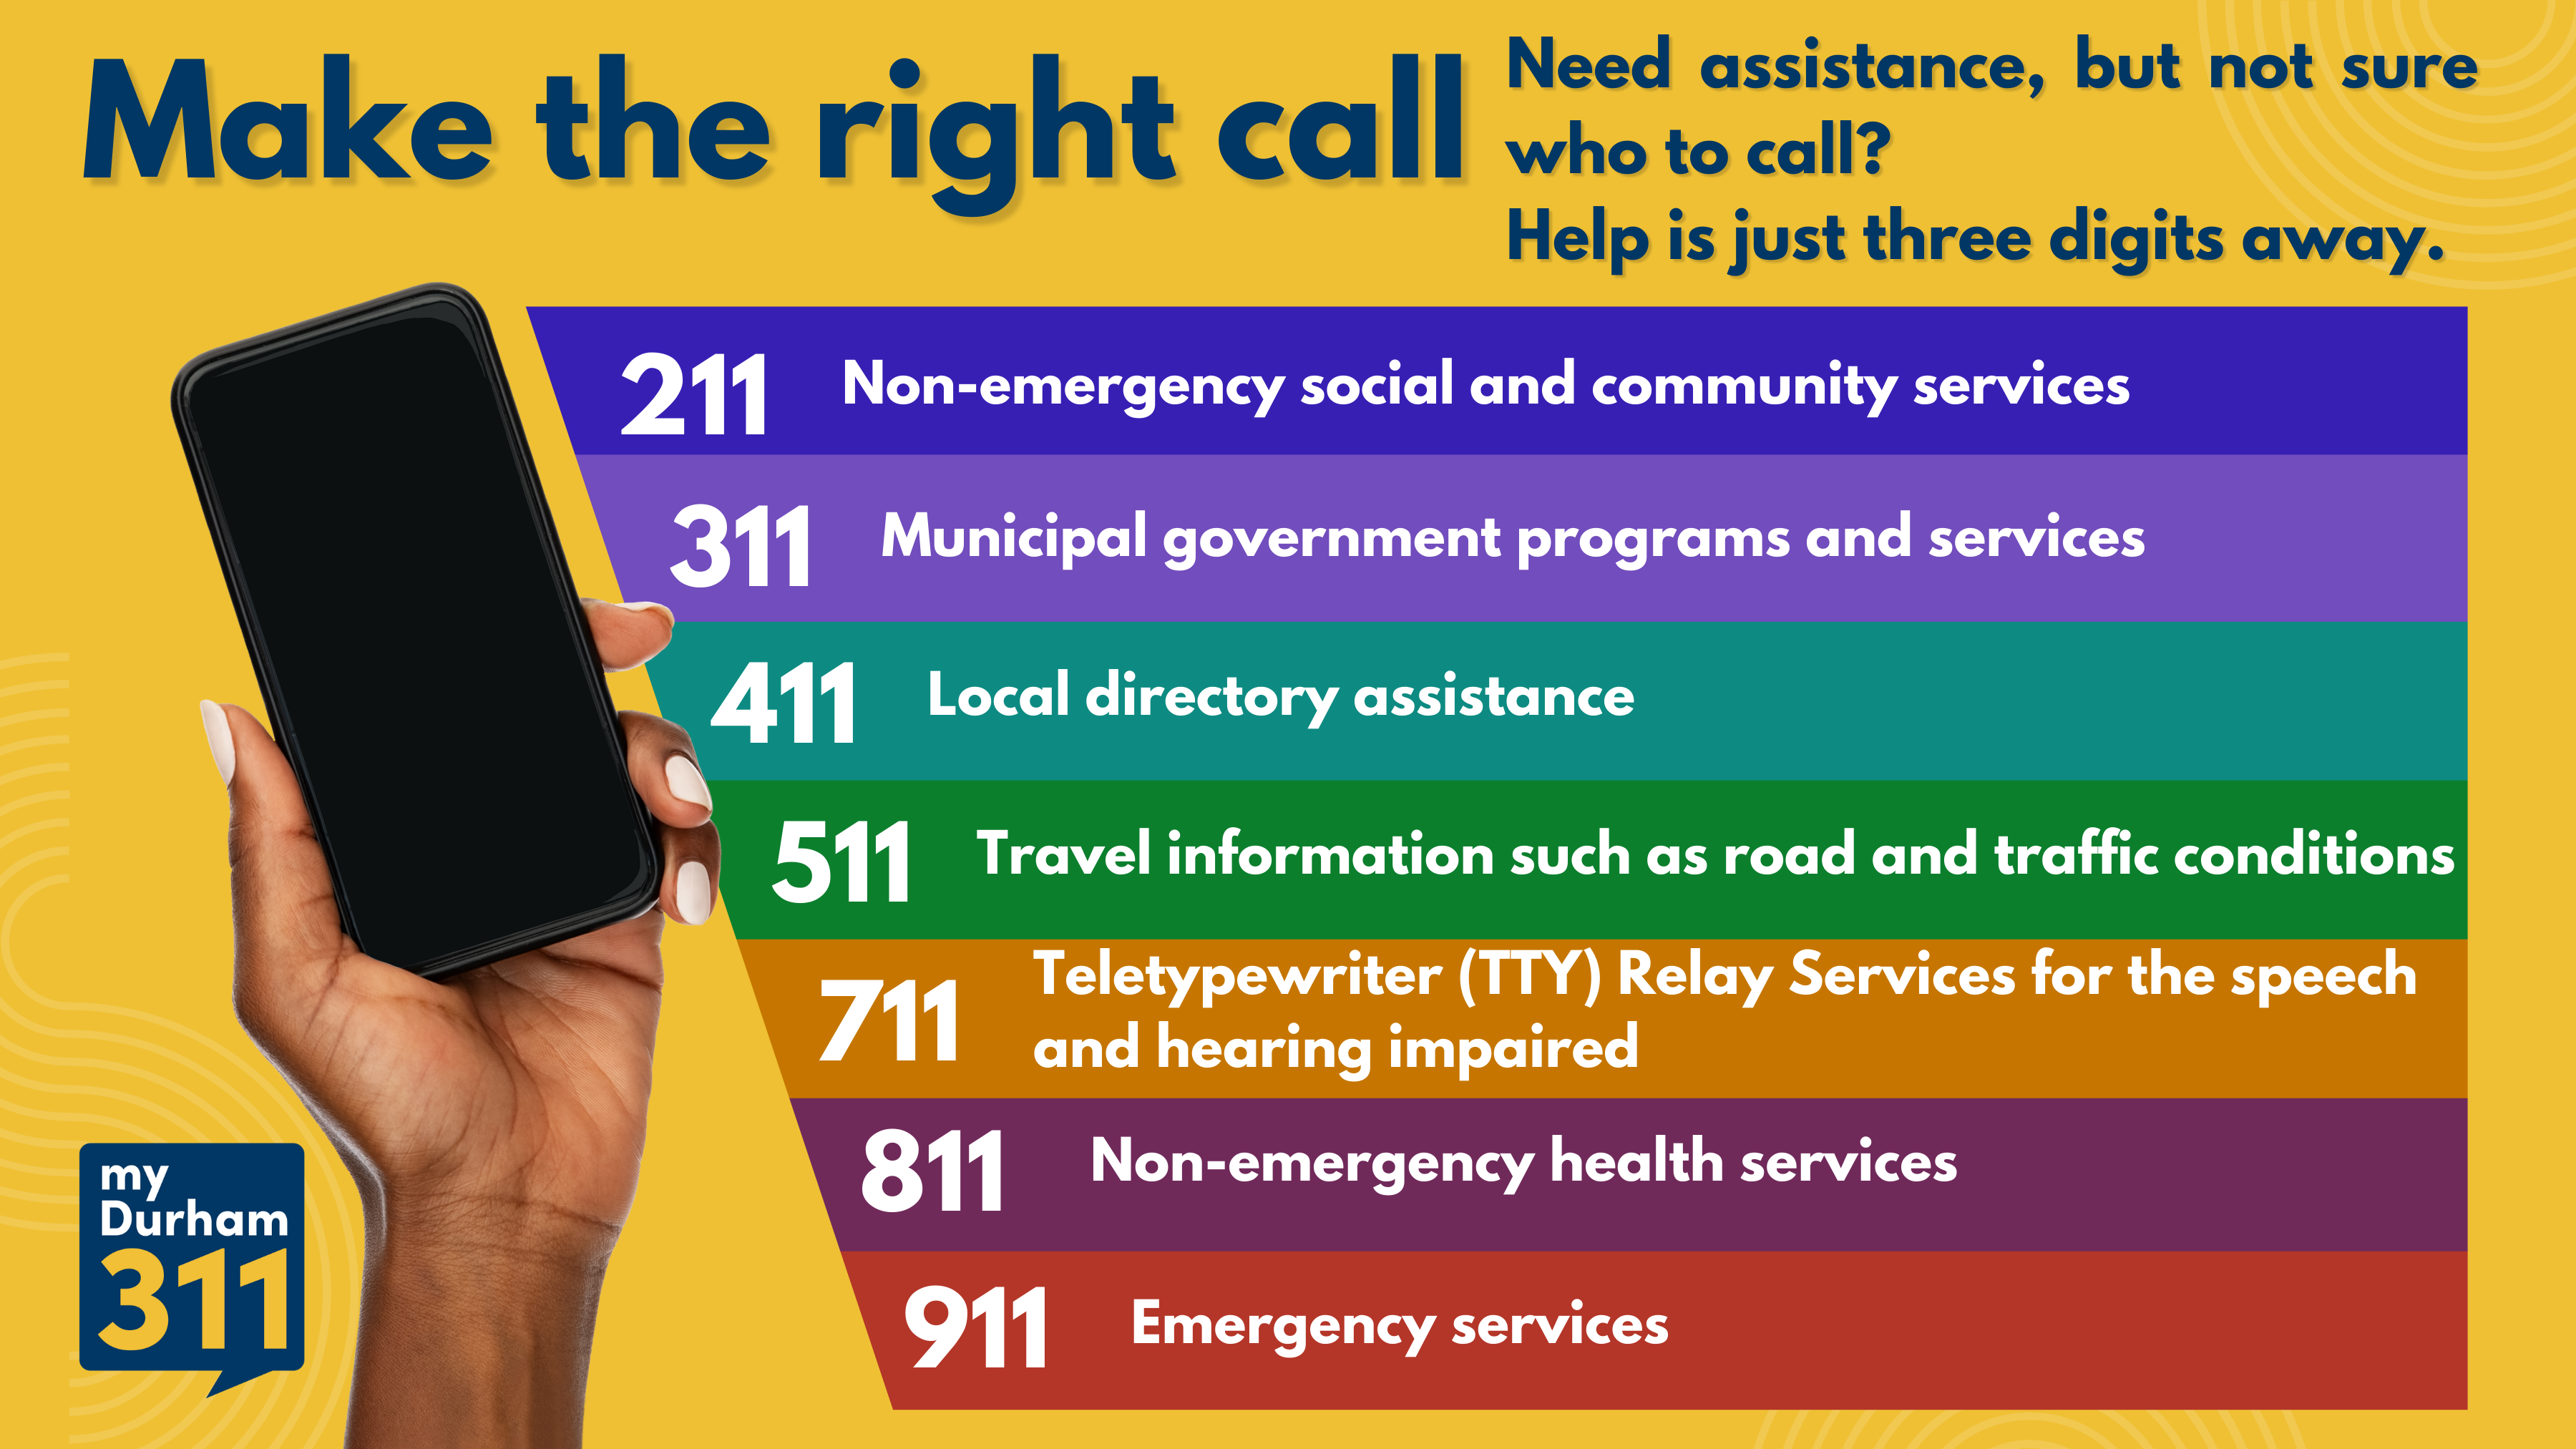 Make the Right Call graphic